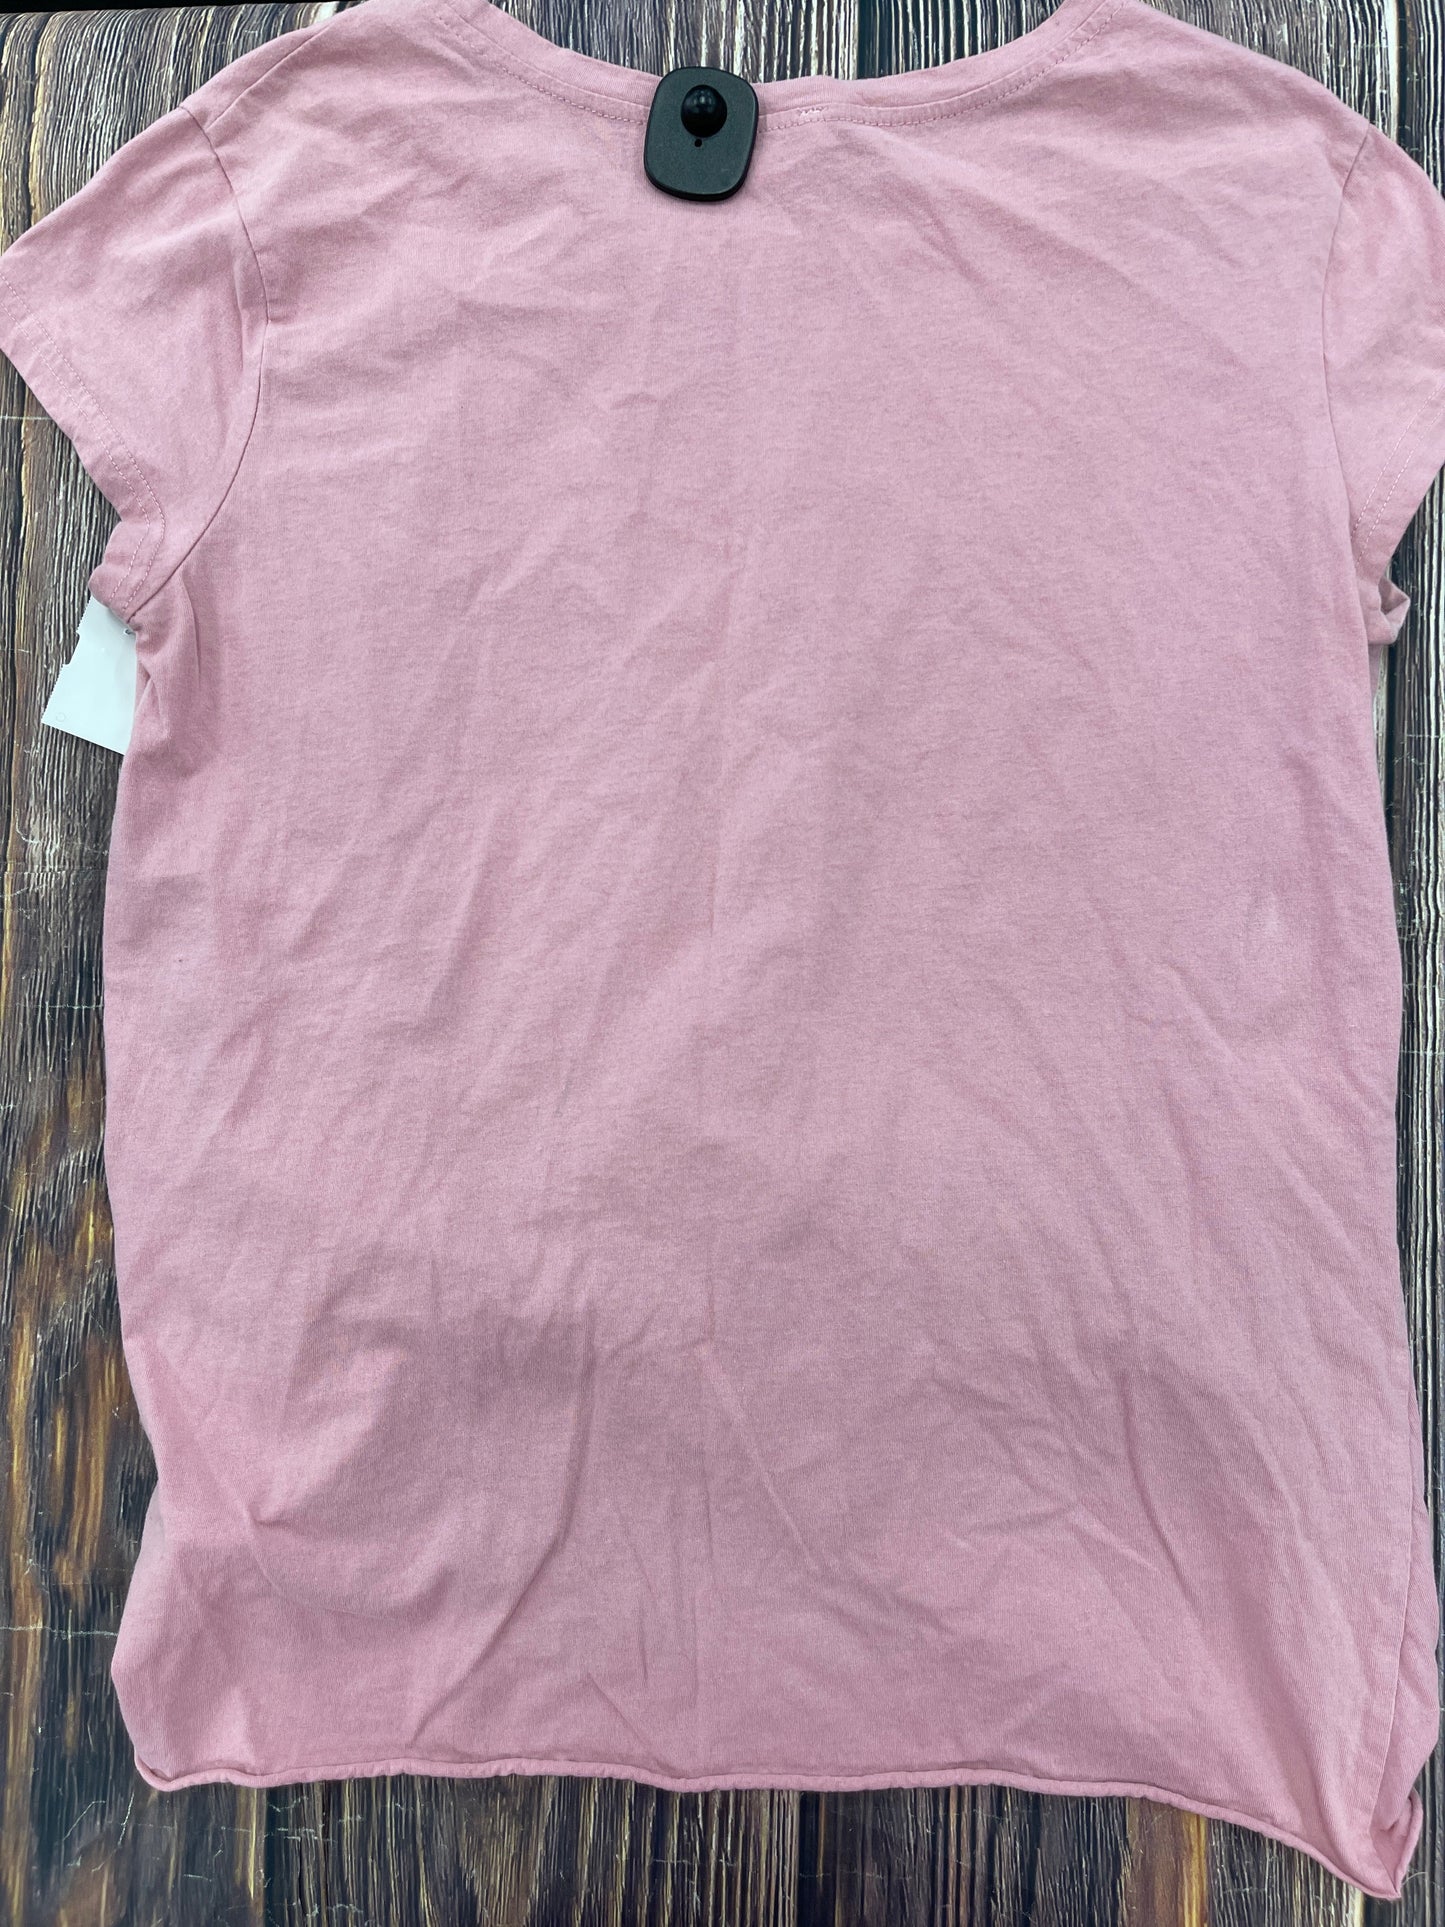 Pink Top Short Sleeve Umgee, Size S